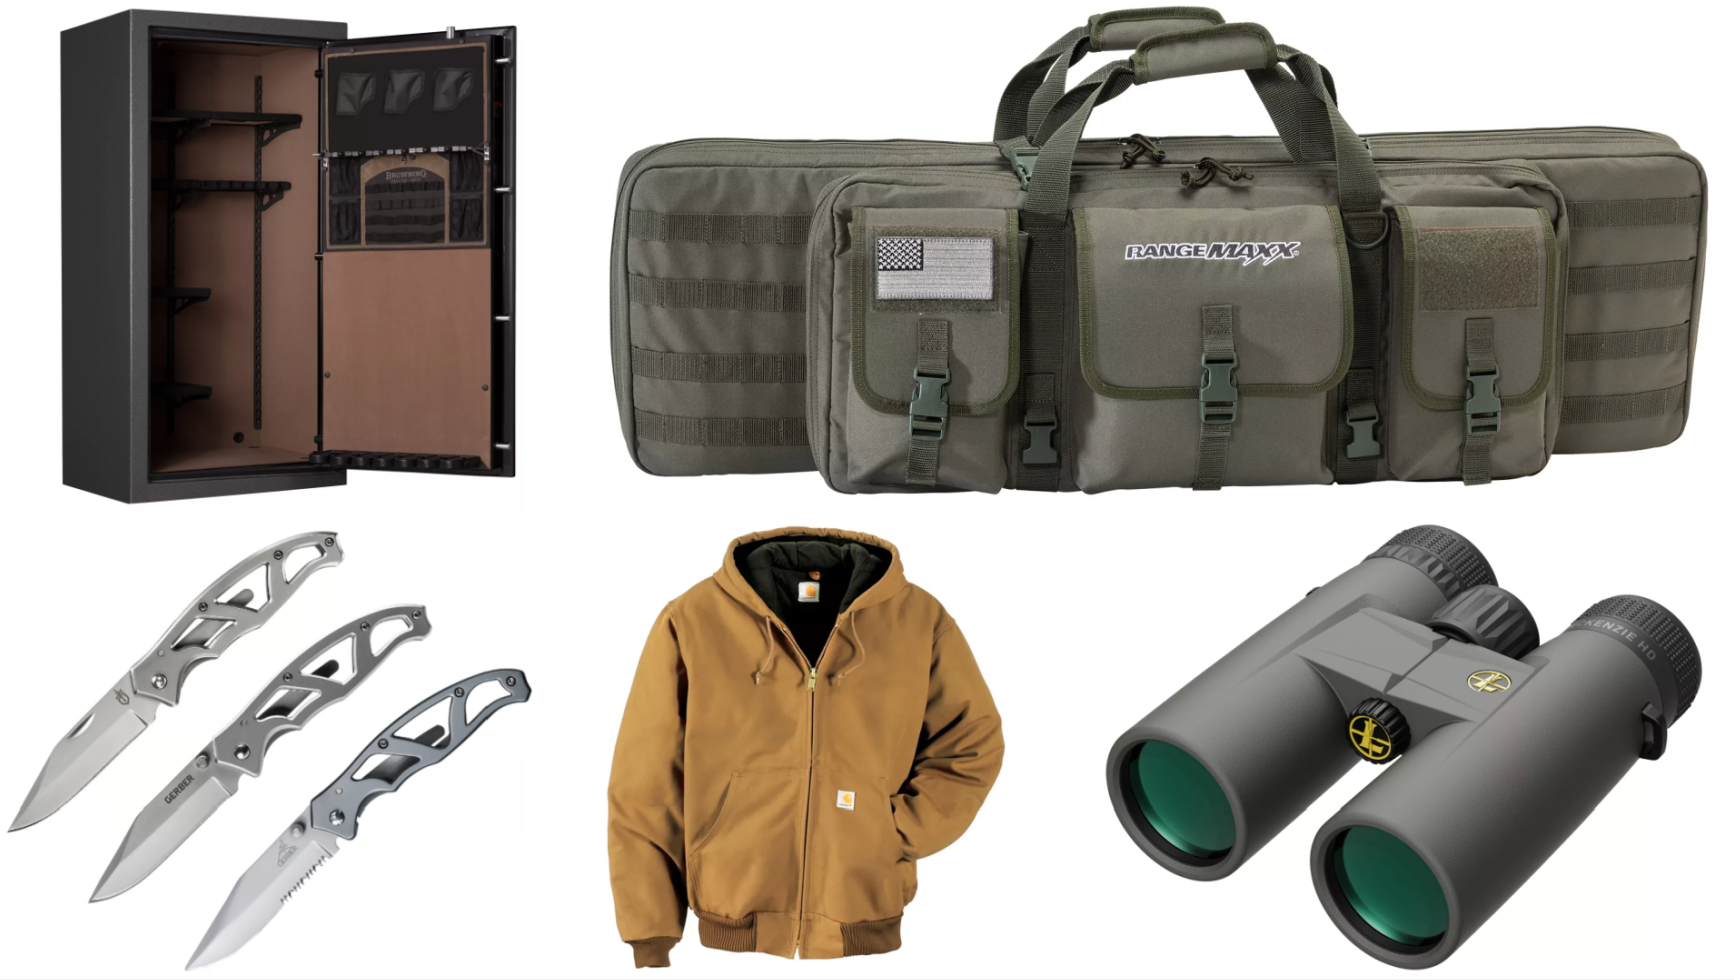 The best Cabela’s Black Friday deals on shooting, hunting, grilling